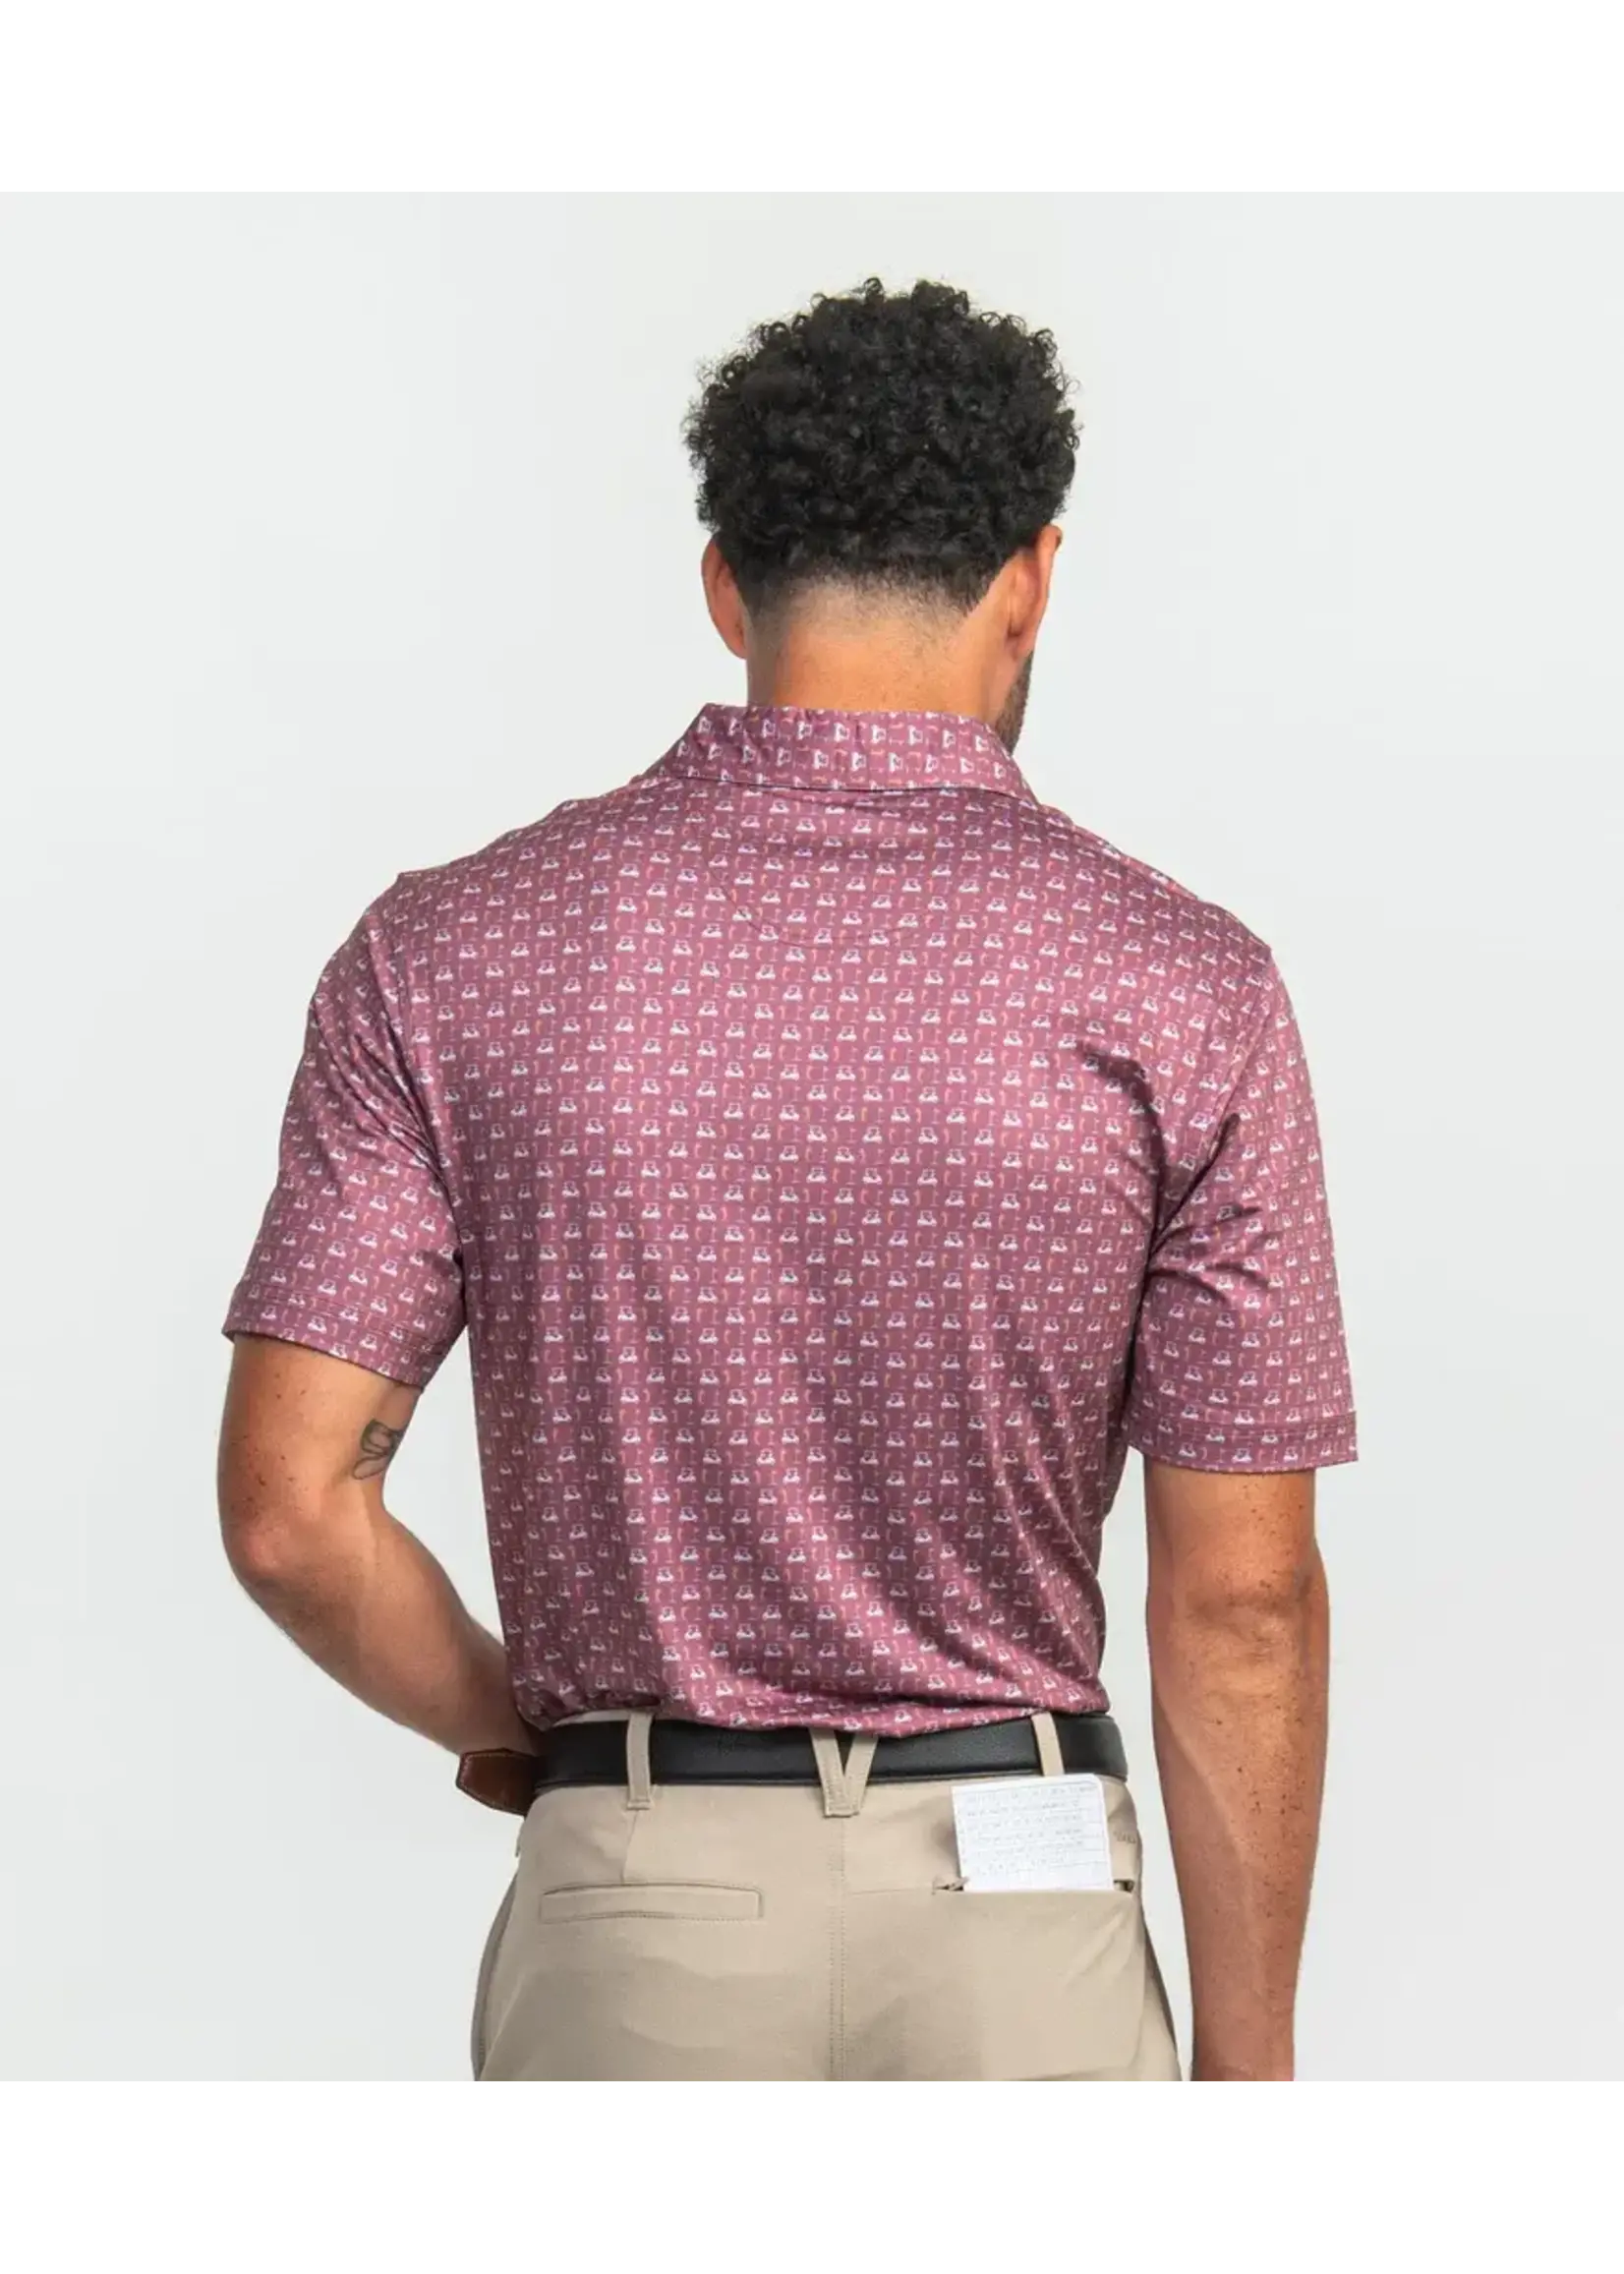 Southern Shirt Perfect Round Printed Polo